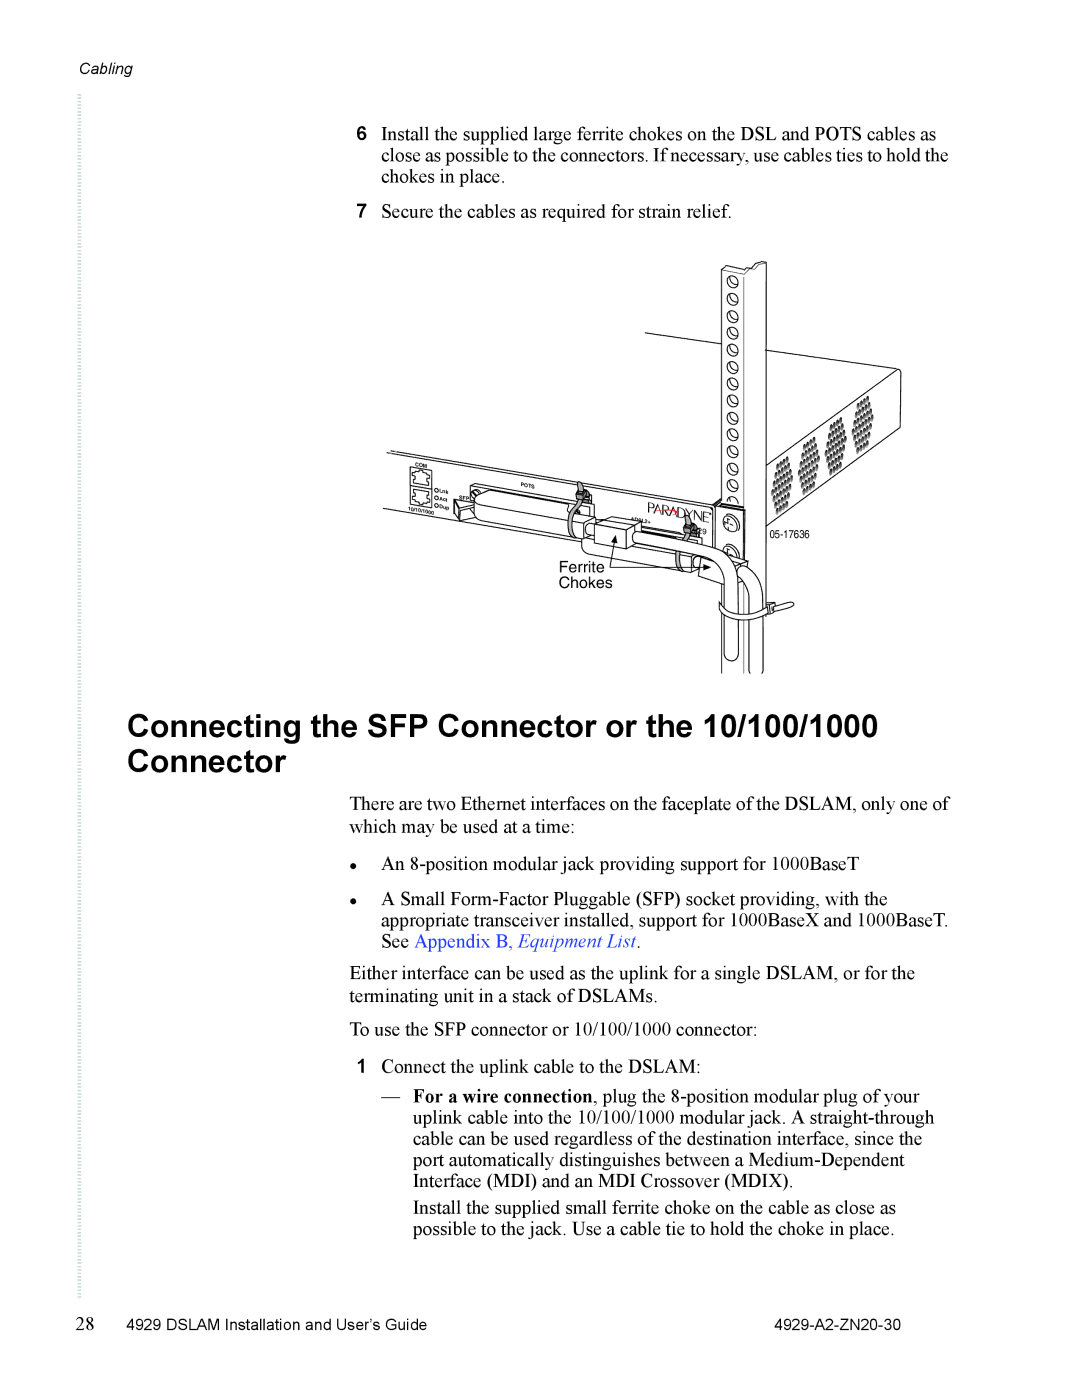 Zhone Technologies 4929 DSLAM manual Connecting the SFP Connector or the 10/100/1000 Connector 